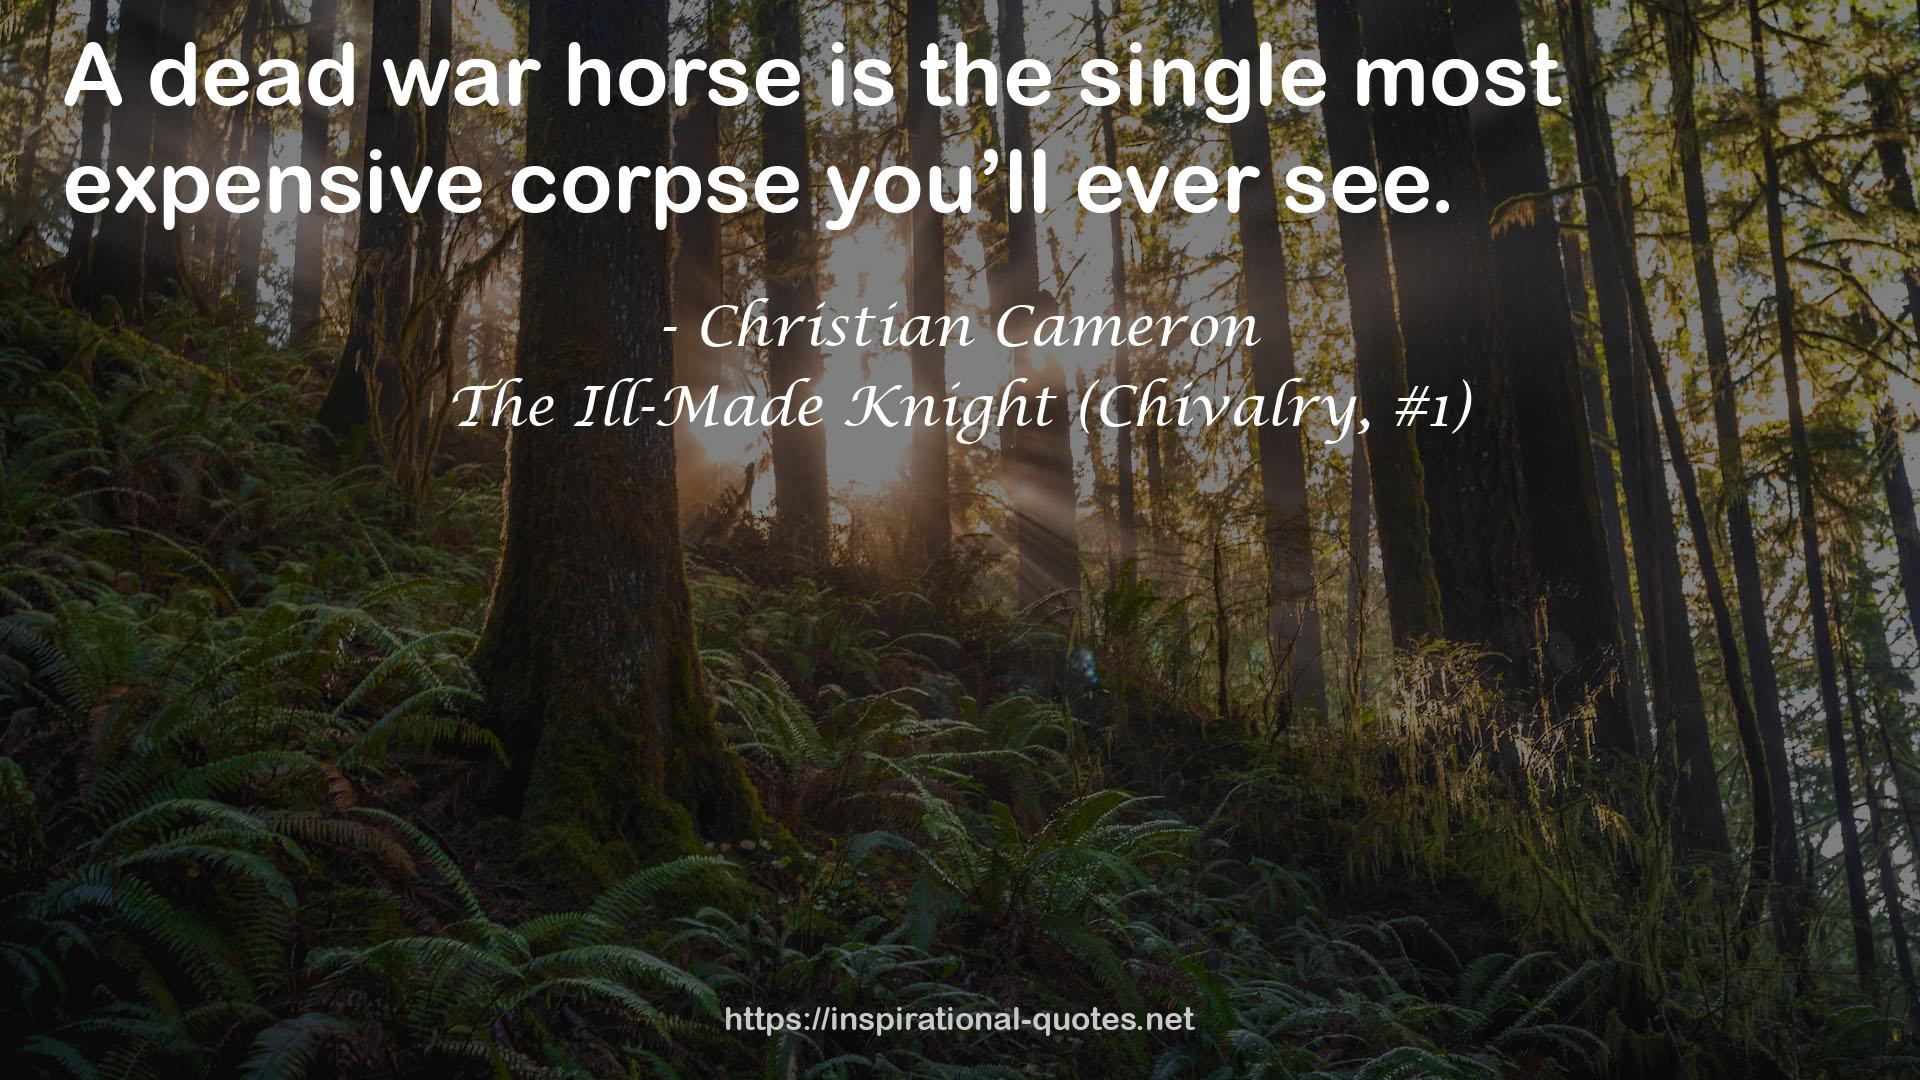 The Ill-Made Knight (Chivalry, #1) QUOTES